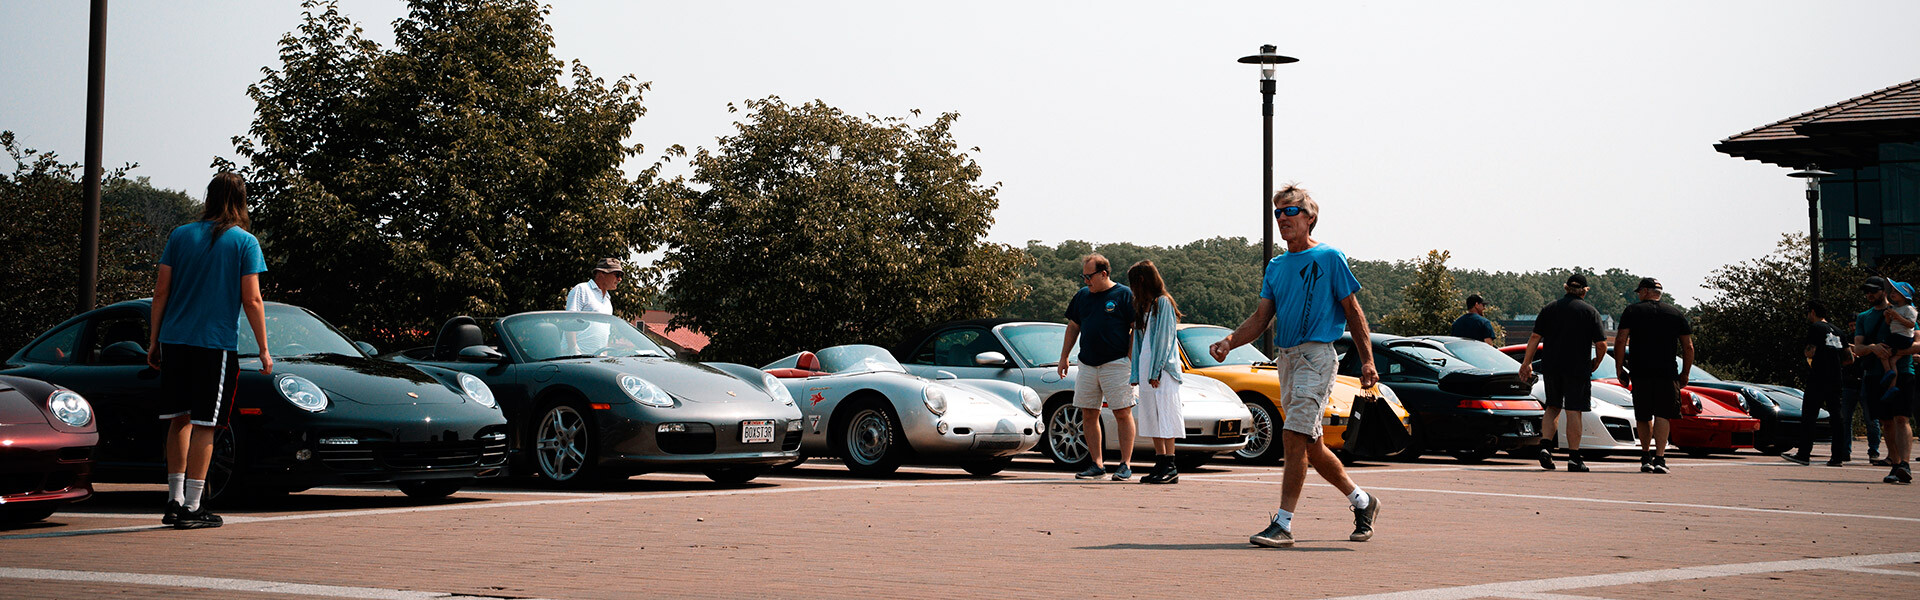 Join the ultimate Porsche car club - outside car club meeting at Kellymoss